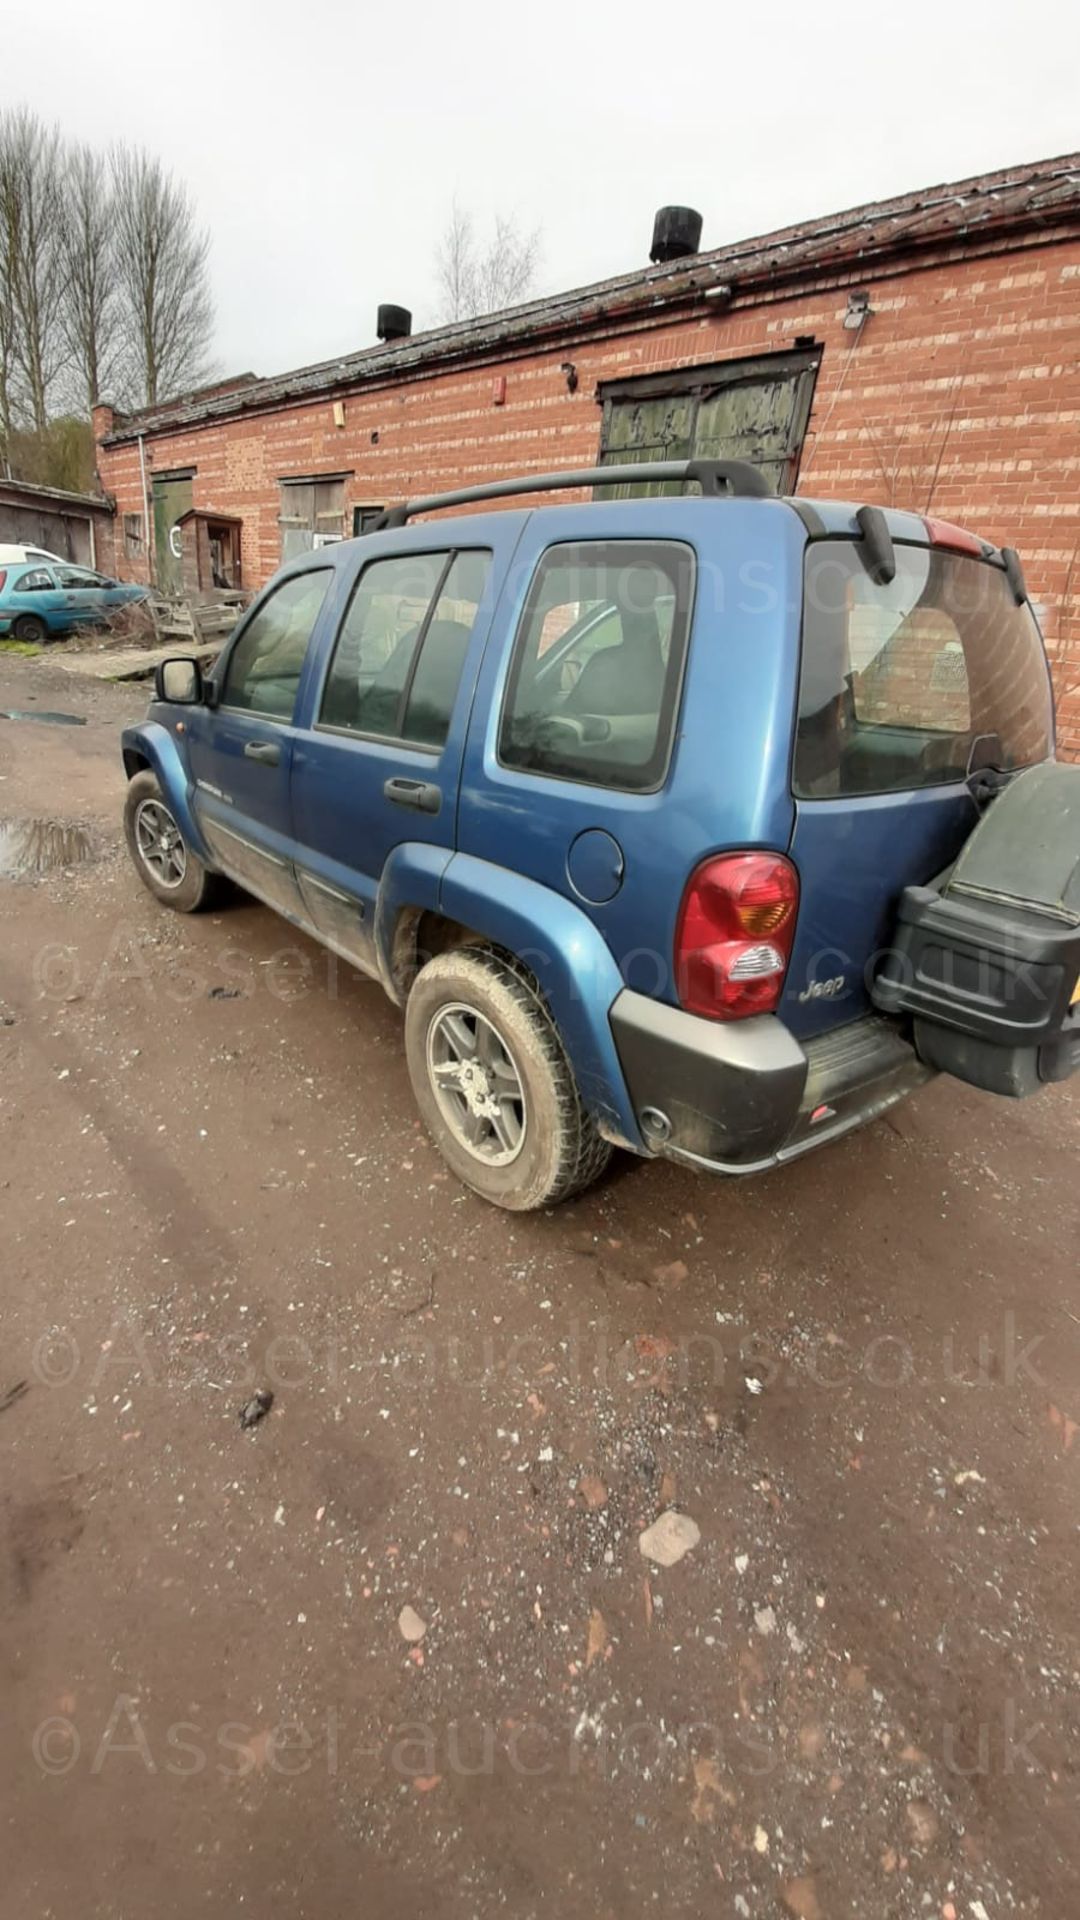 2004 JEEP CHEROKEE EXTREME SPORT A BLUE ESTATE, SHOWING 139,091 MILES, AUTO 4 GEARS *NO VAT* - Image 3 of 11